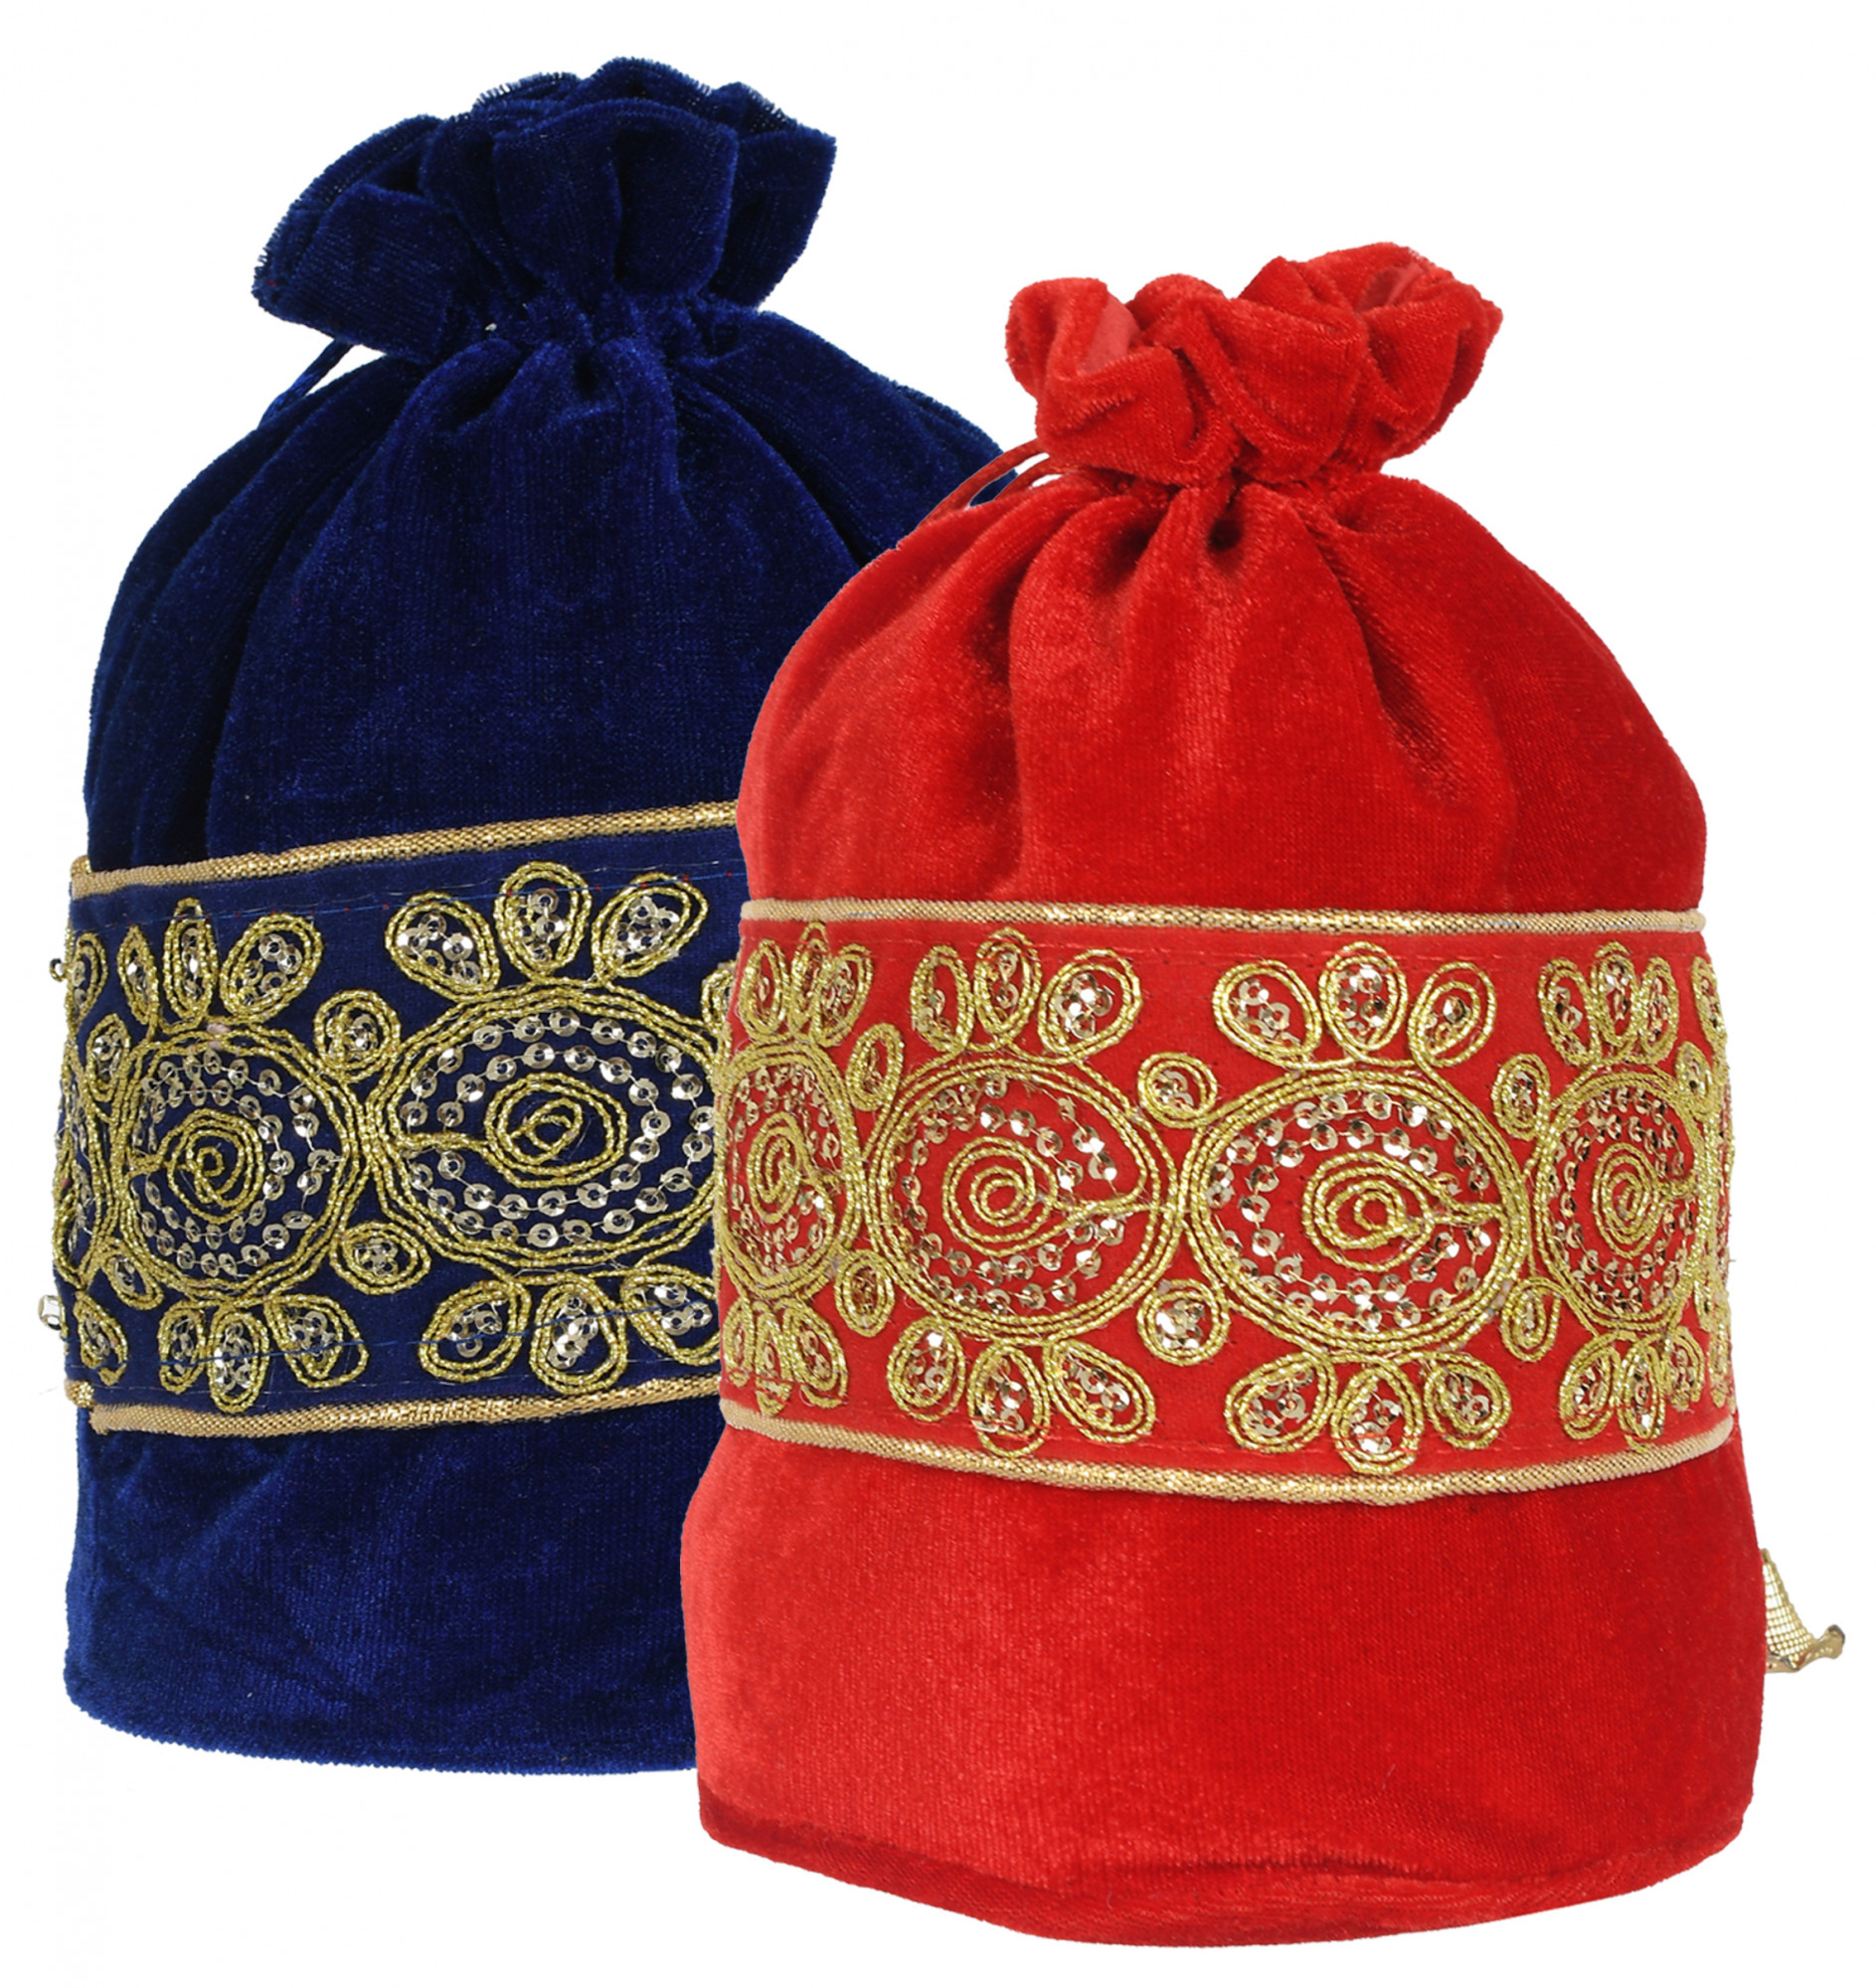 Kuber Industries Embroidered Design Drawstring Potli Bag Party Wedding Favor Gift Jewelry Bags-(Blue & Red)